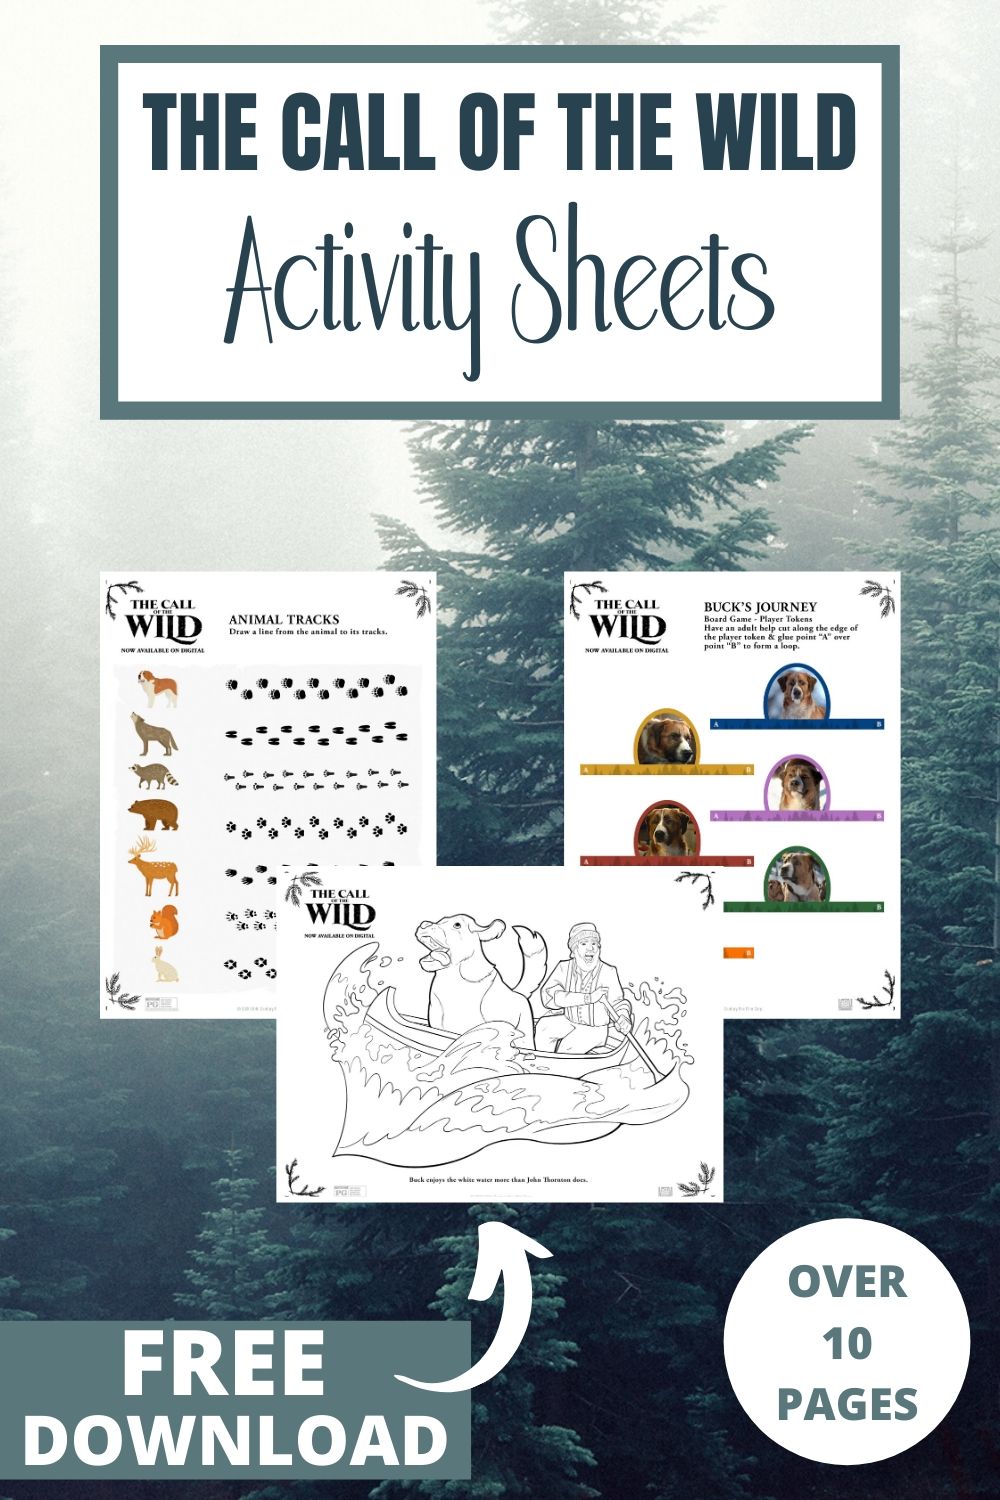 The Call of the Wild Activity sheets